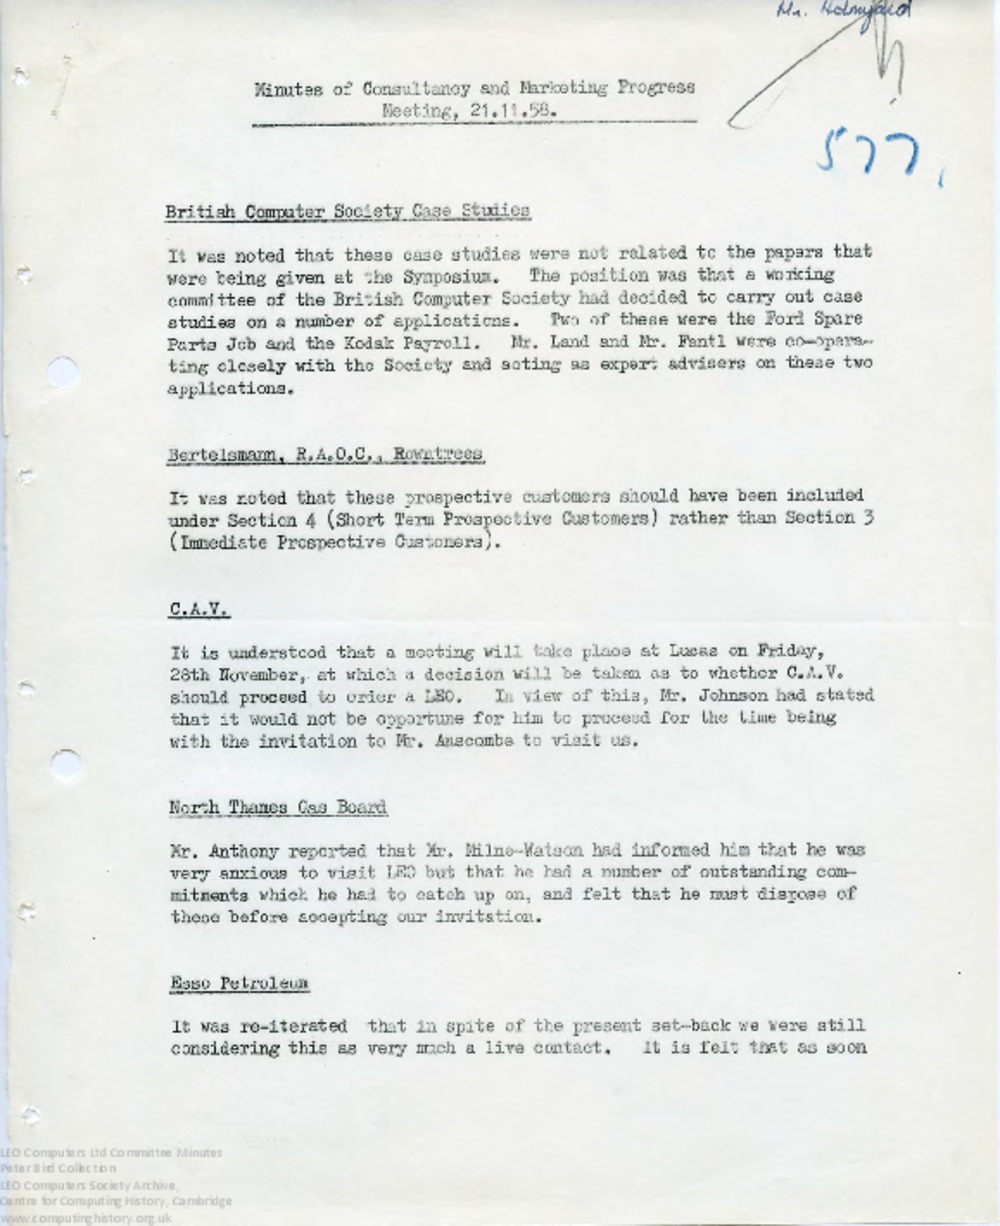 Article: 64465 Consultancy and Marketing Progress Minutes and Full Report, 21st Nov 1958